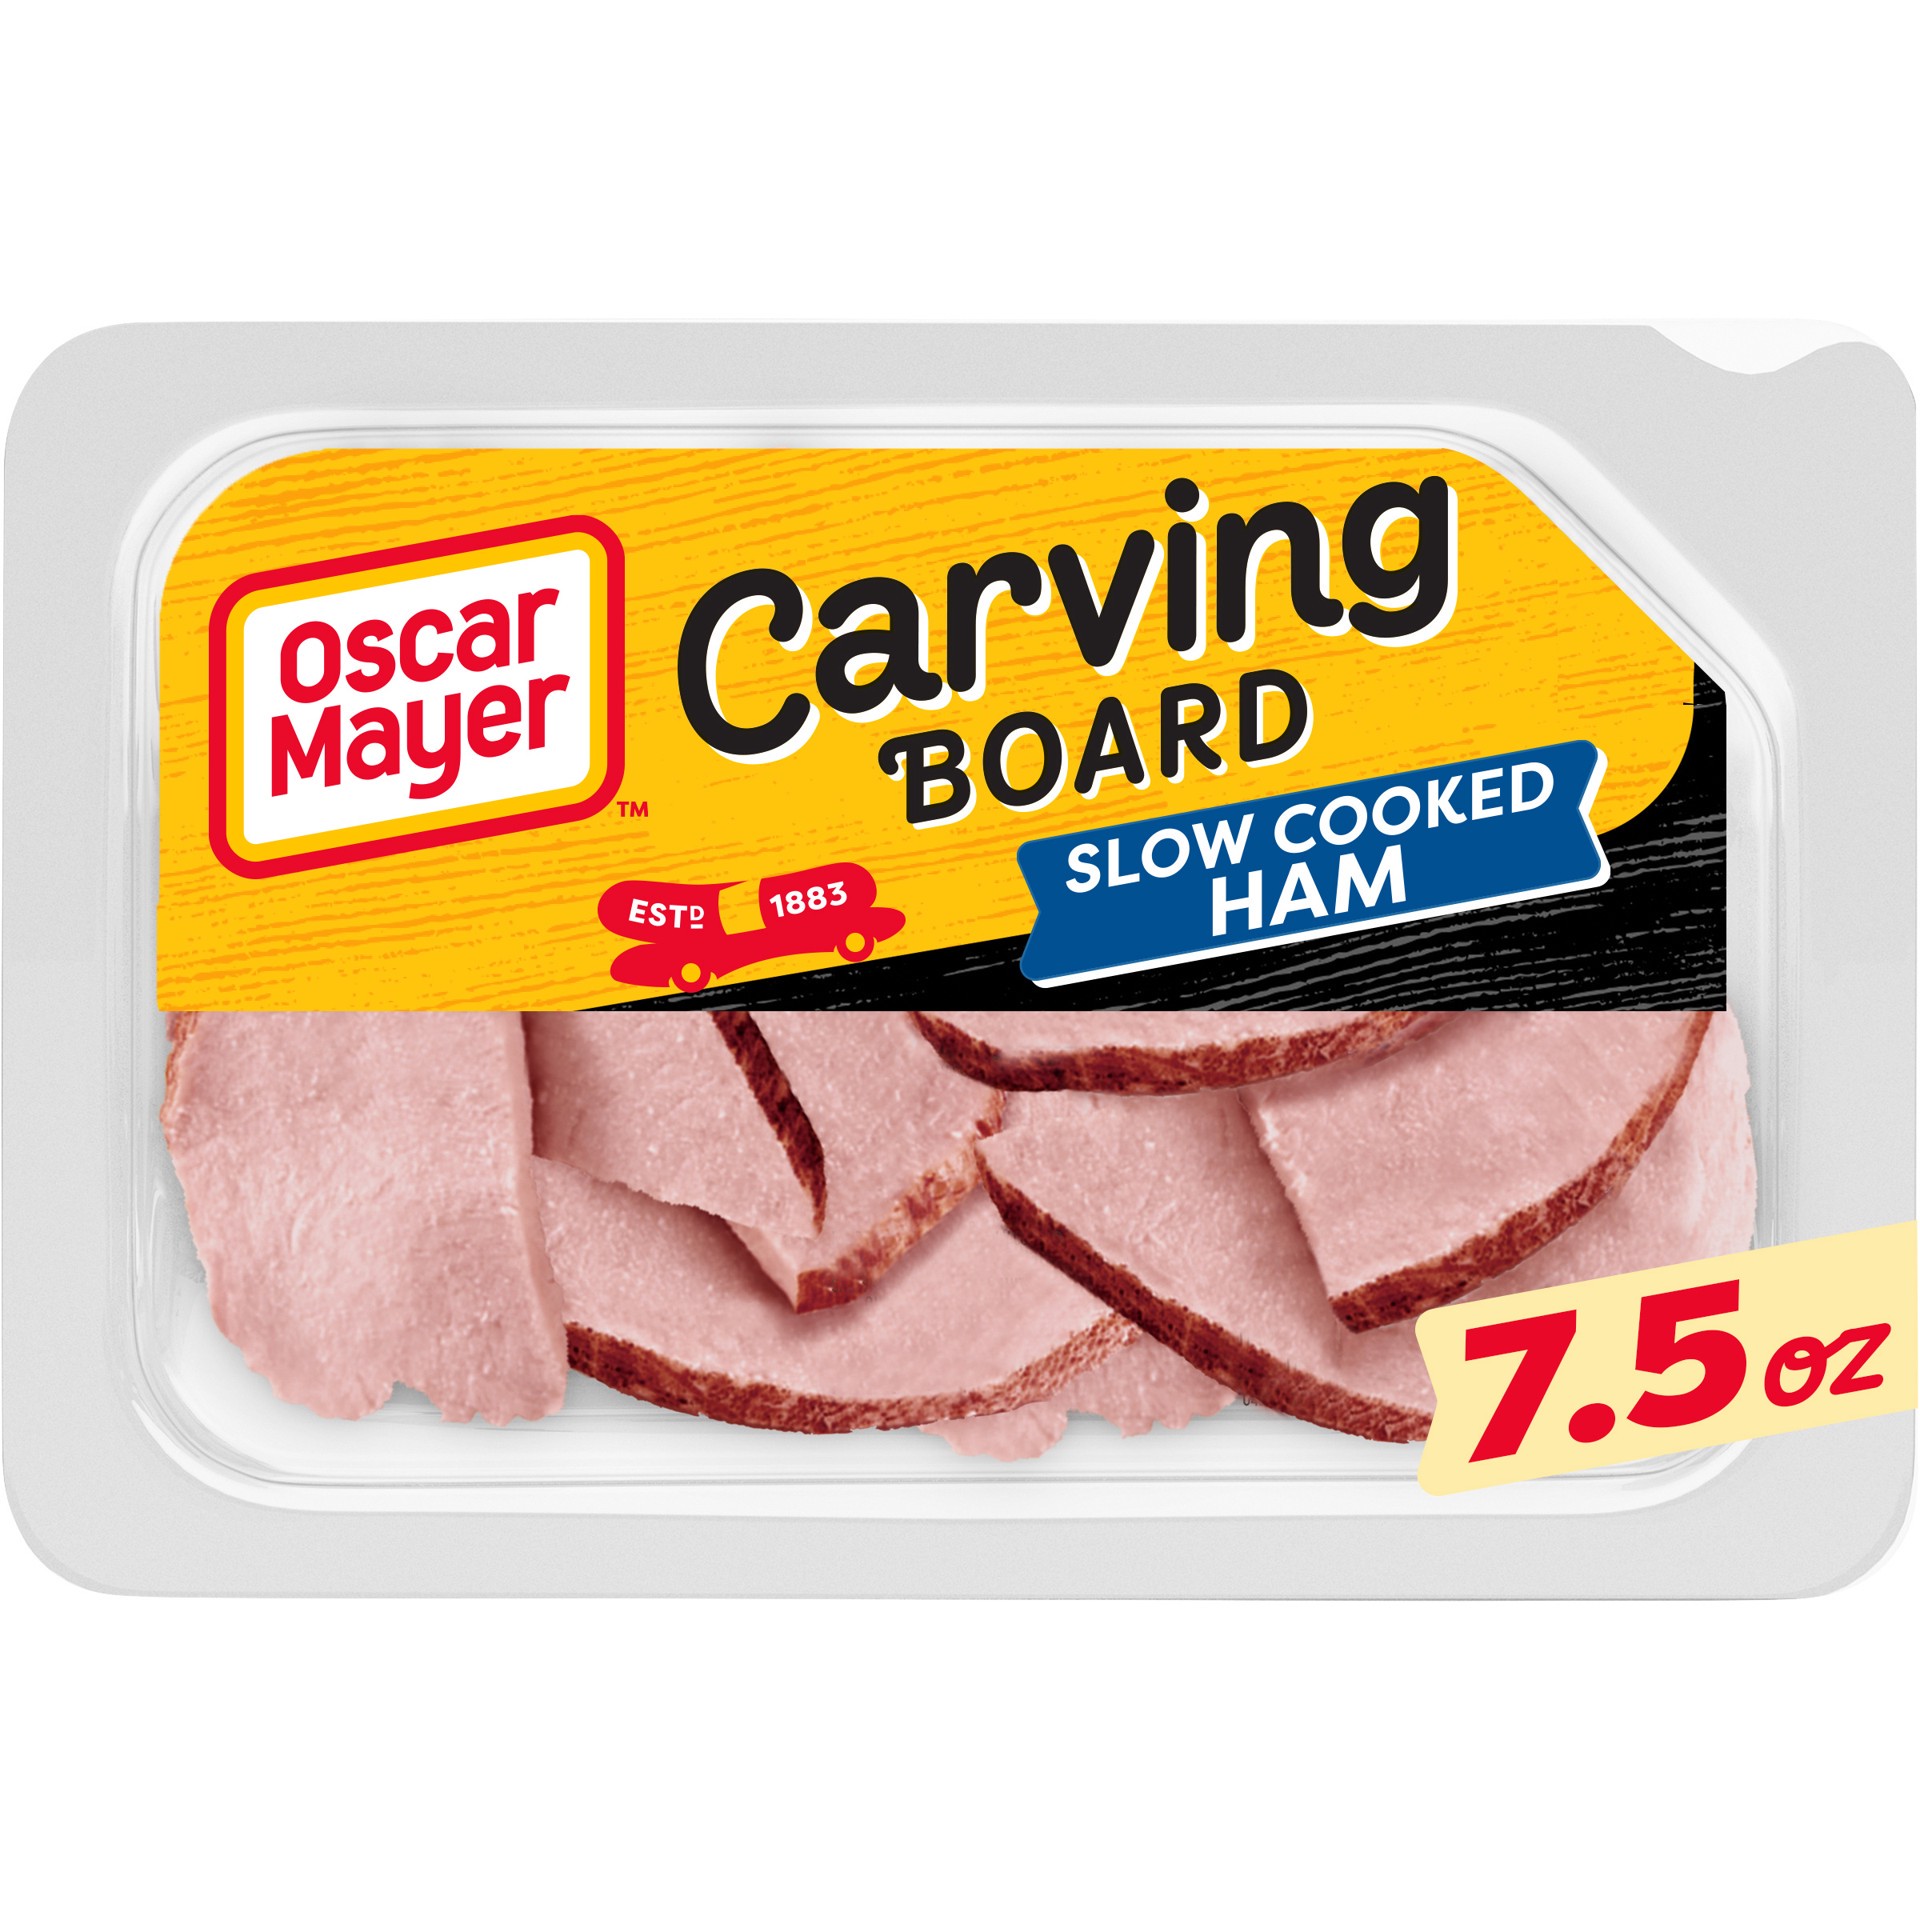 slide 1 of 9, Oscar Mayer Carving Board Slow Cooked Ham Sliced Lunch Meat, 7.5 oz. Tray, 7.5 oz